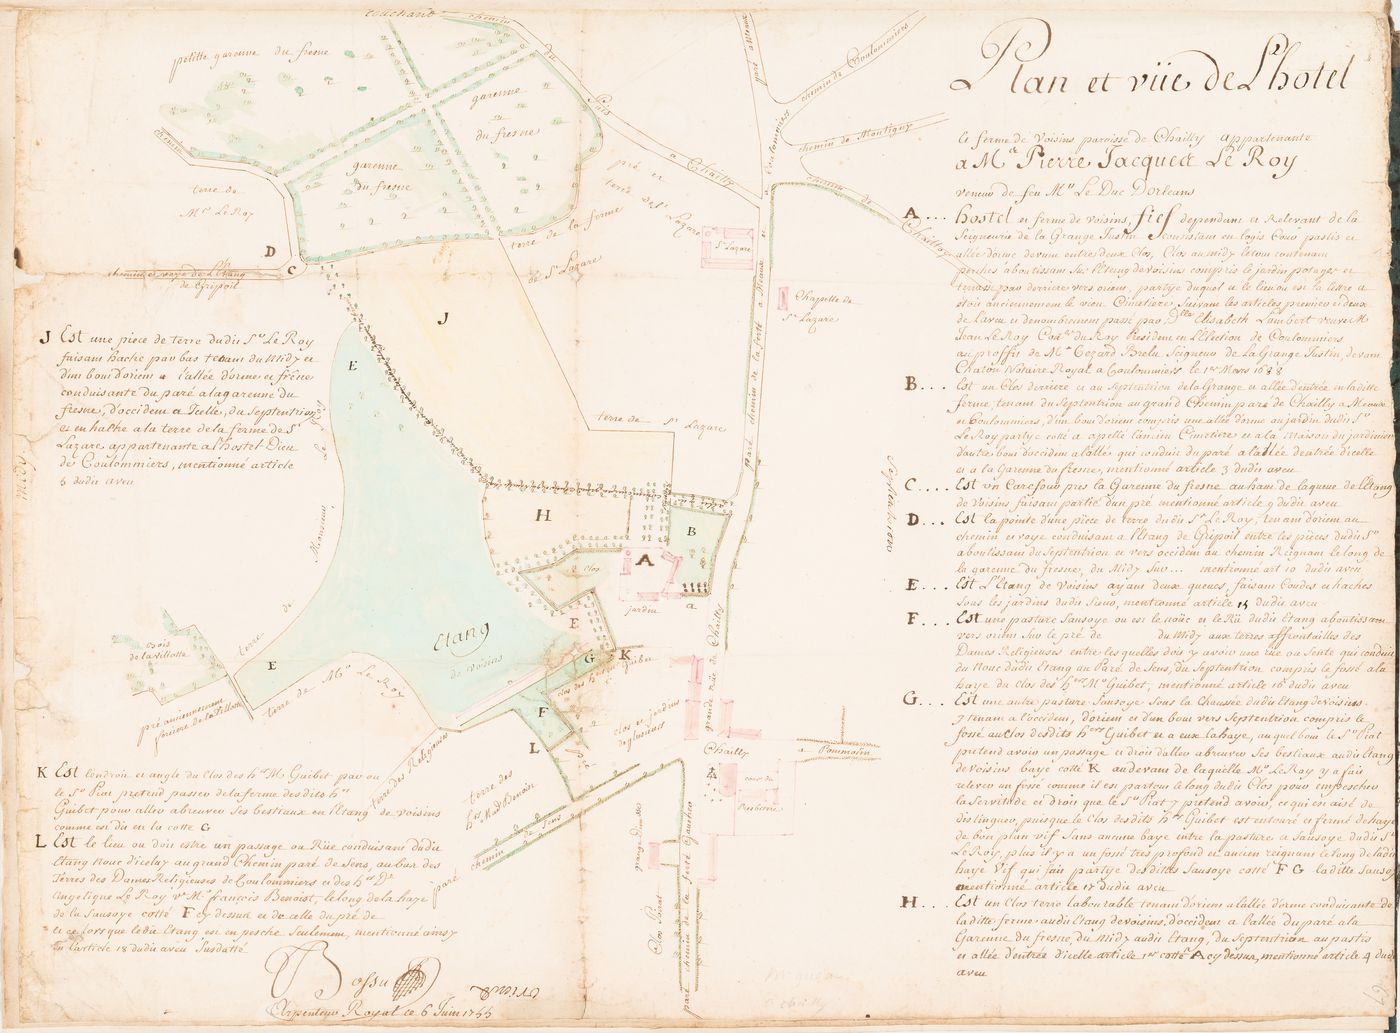 Site plan for the village [?] and vicinity of Chailly, France